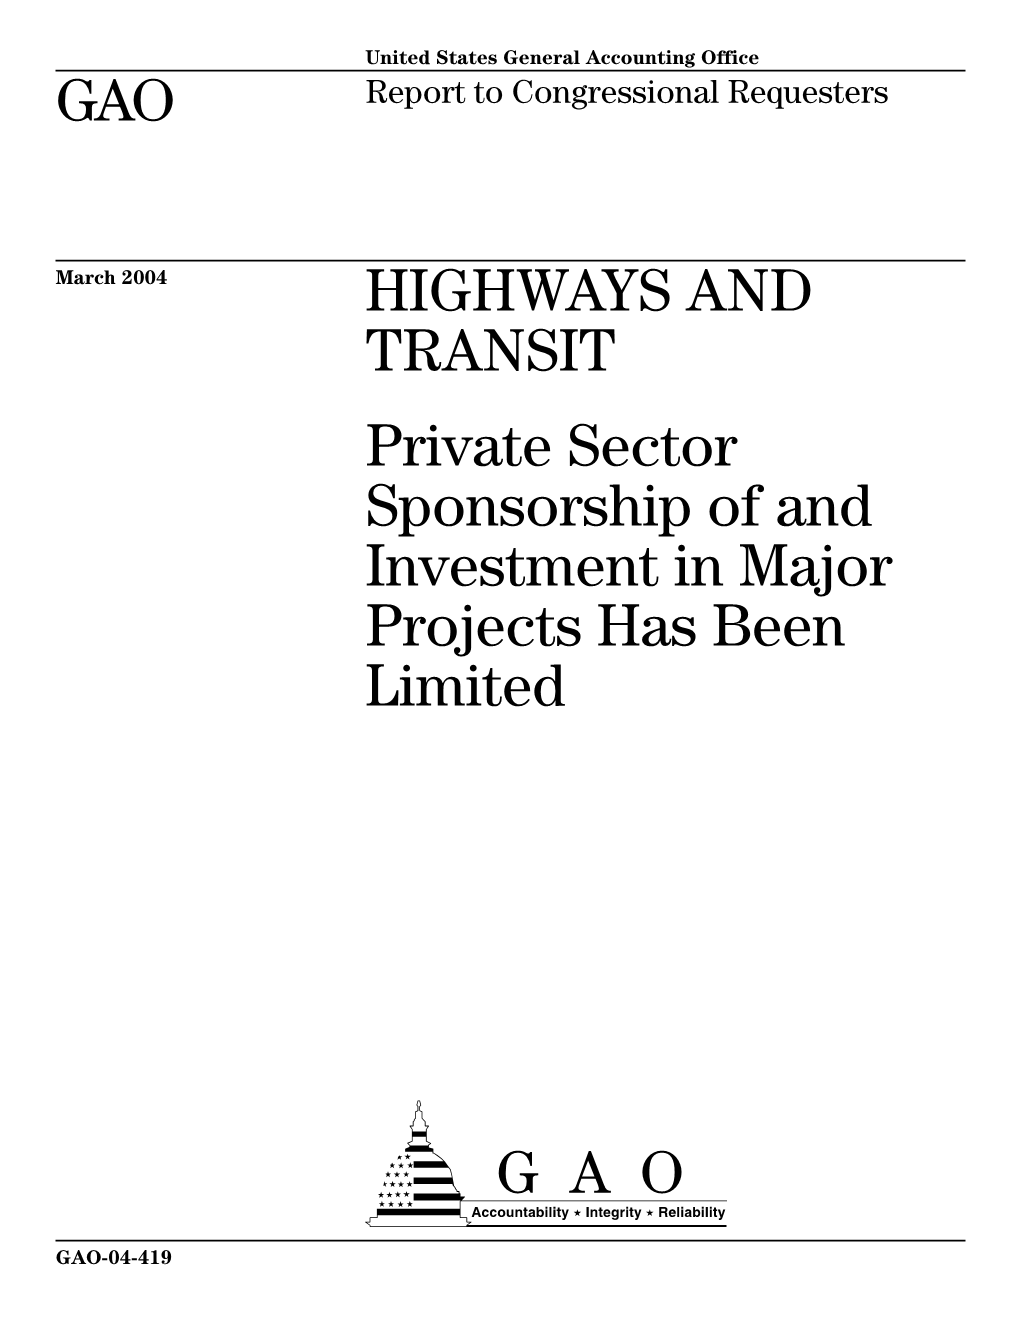 GAO-04-419 Highways and Transit: Private Sector Sponsorship of And